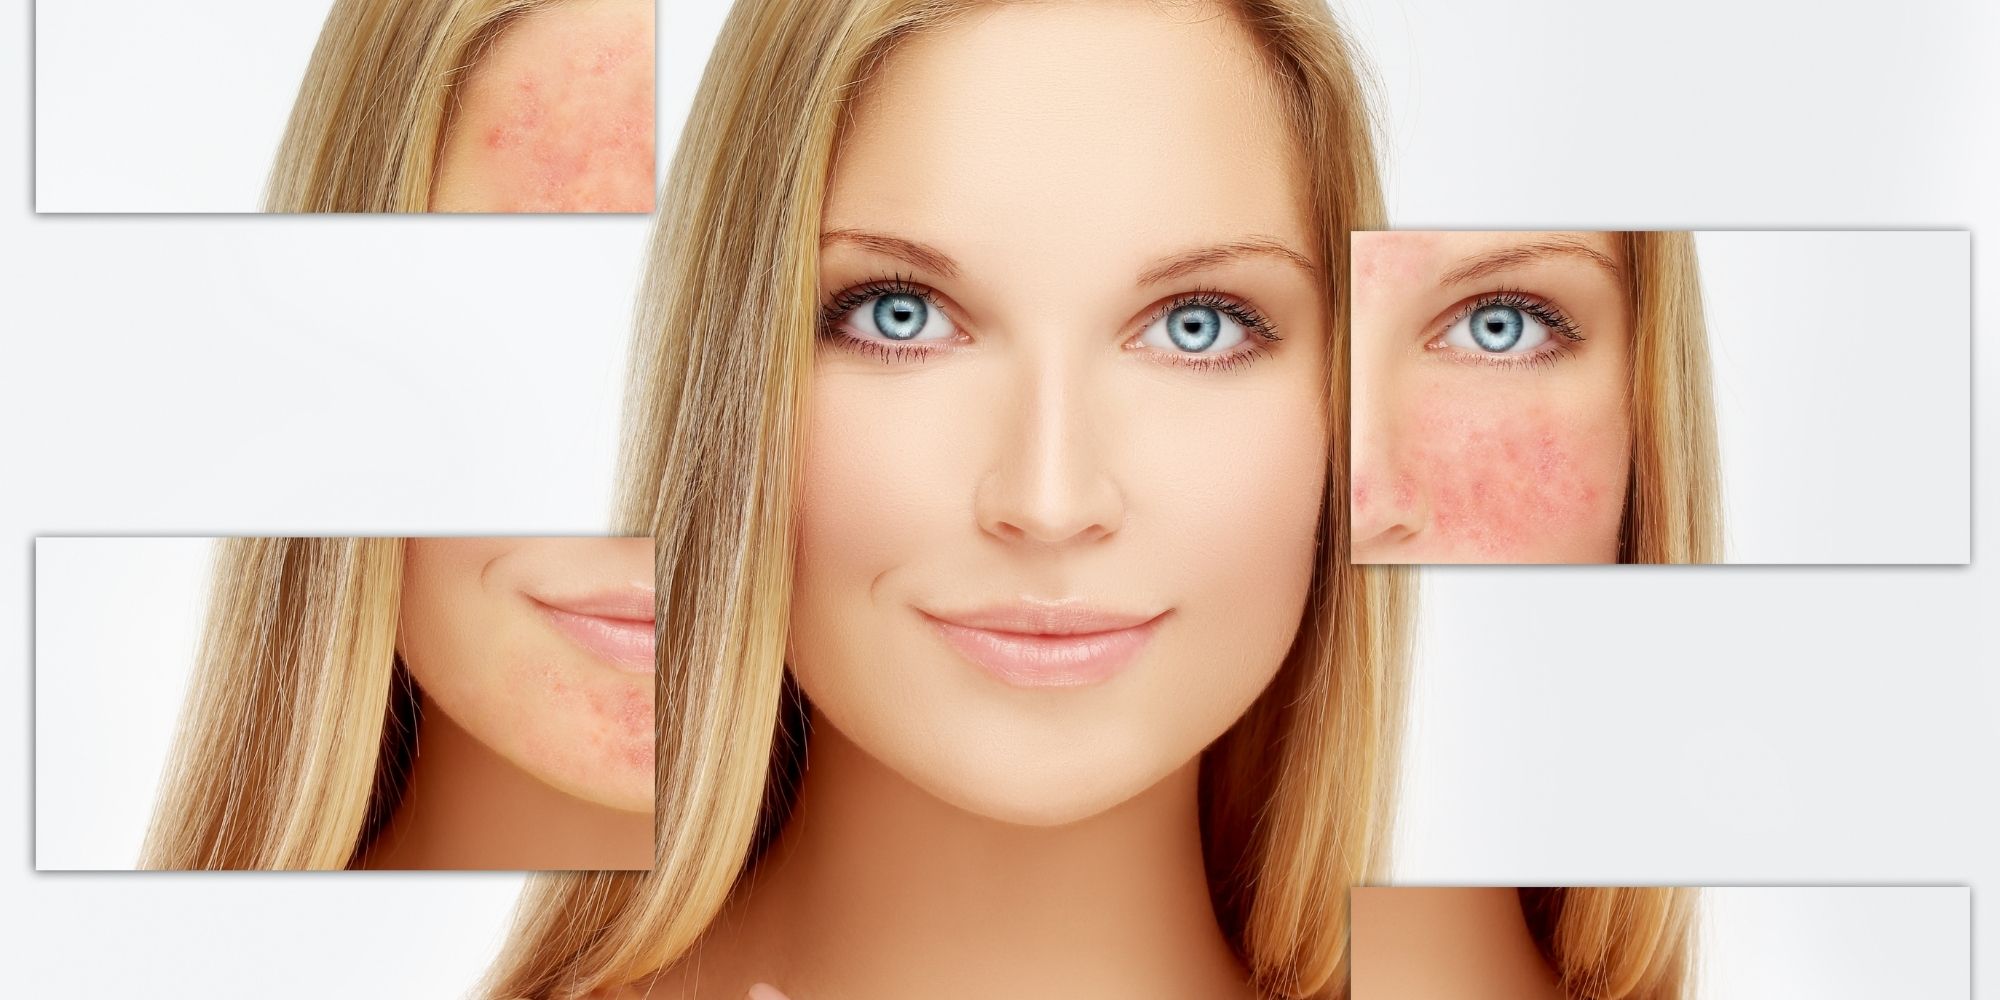 Do you have Rosacea or just Red Cheeks?